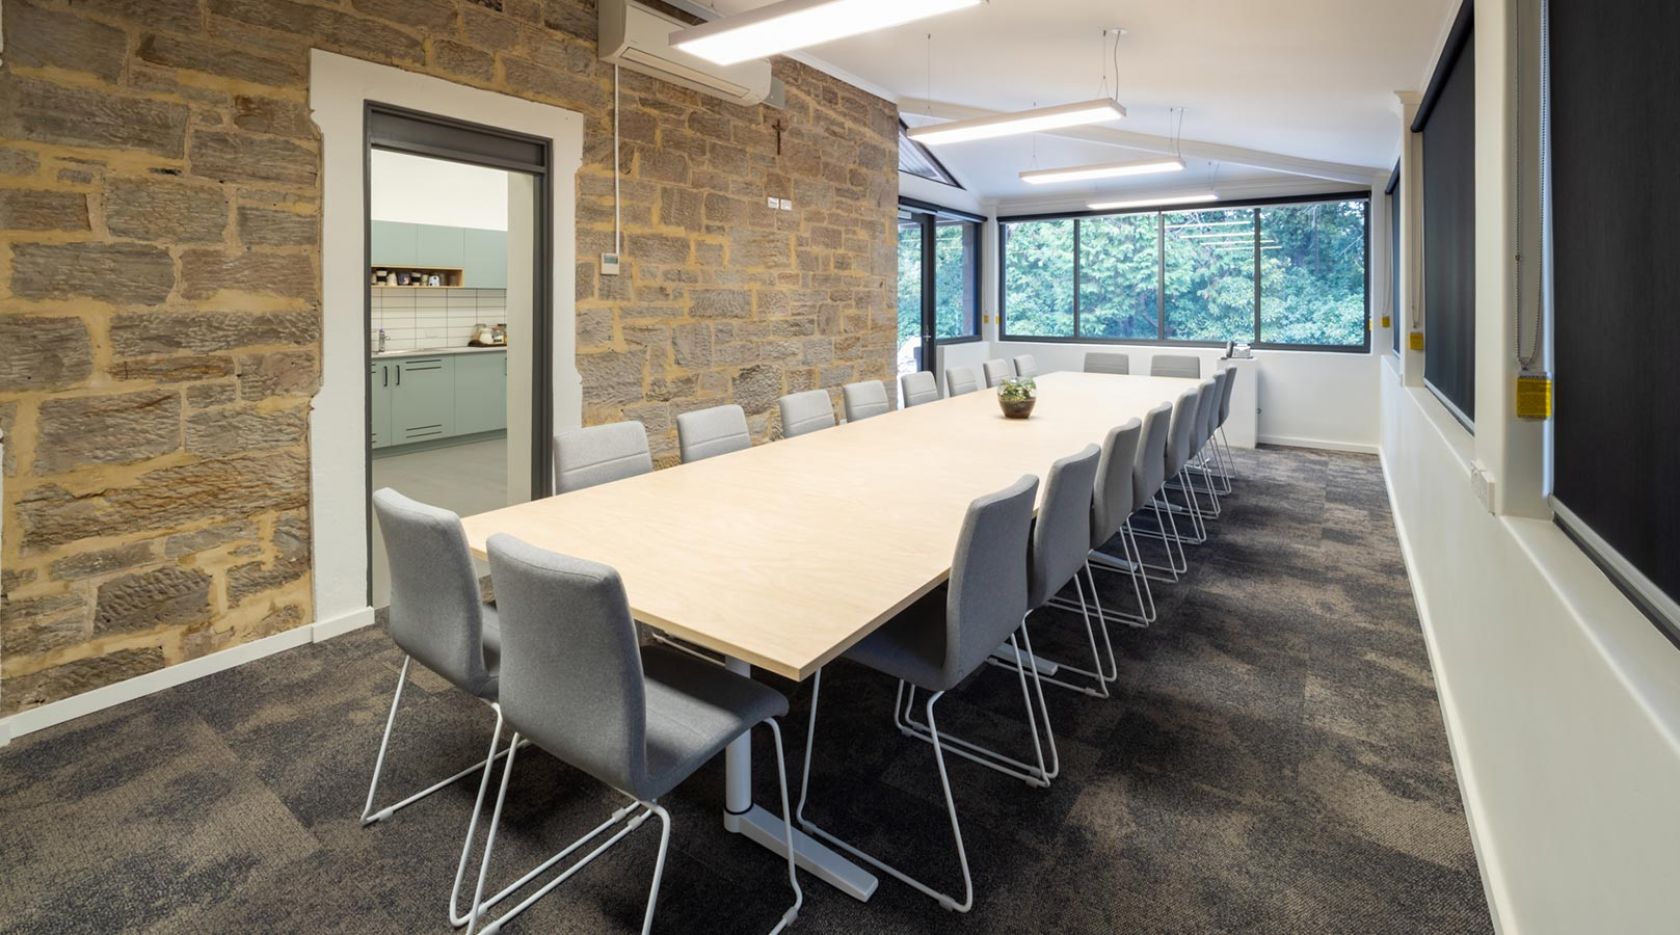 st catherines primary school adelaide construction fitout education interior meeting room 